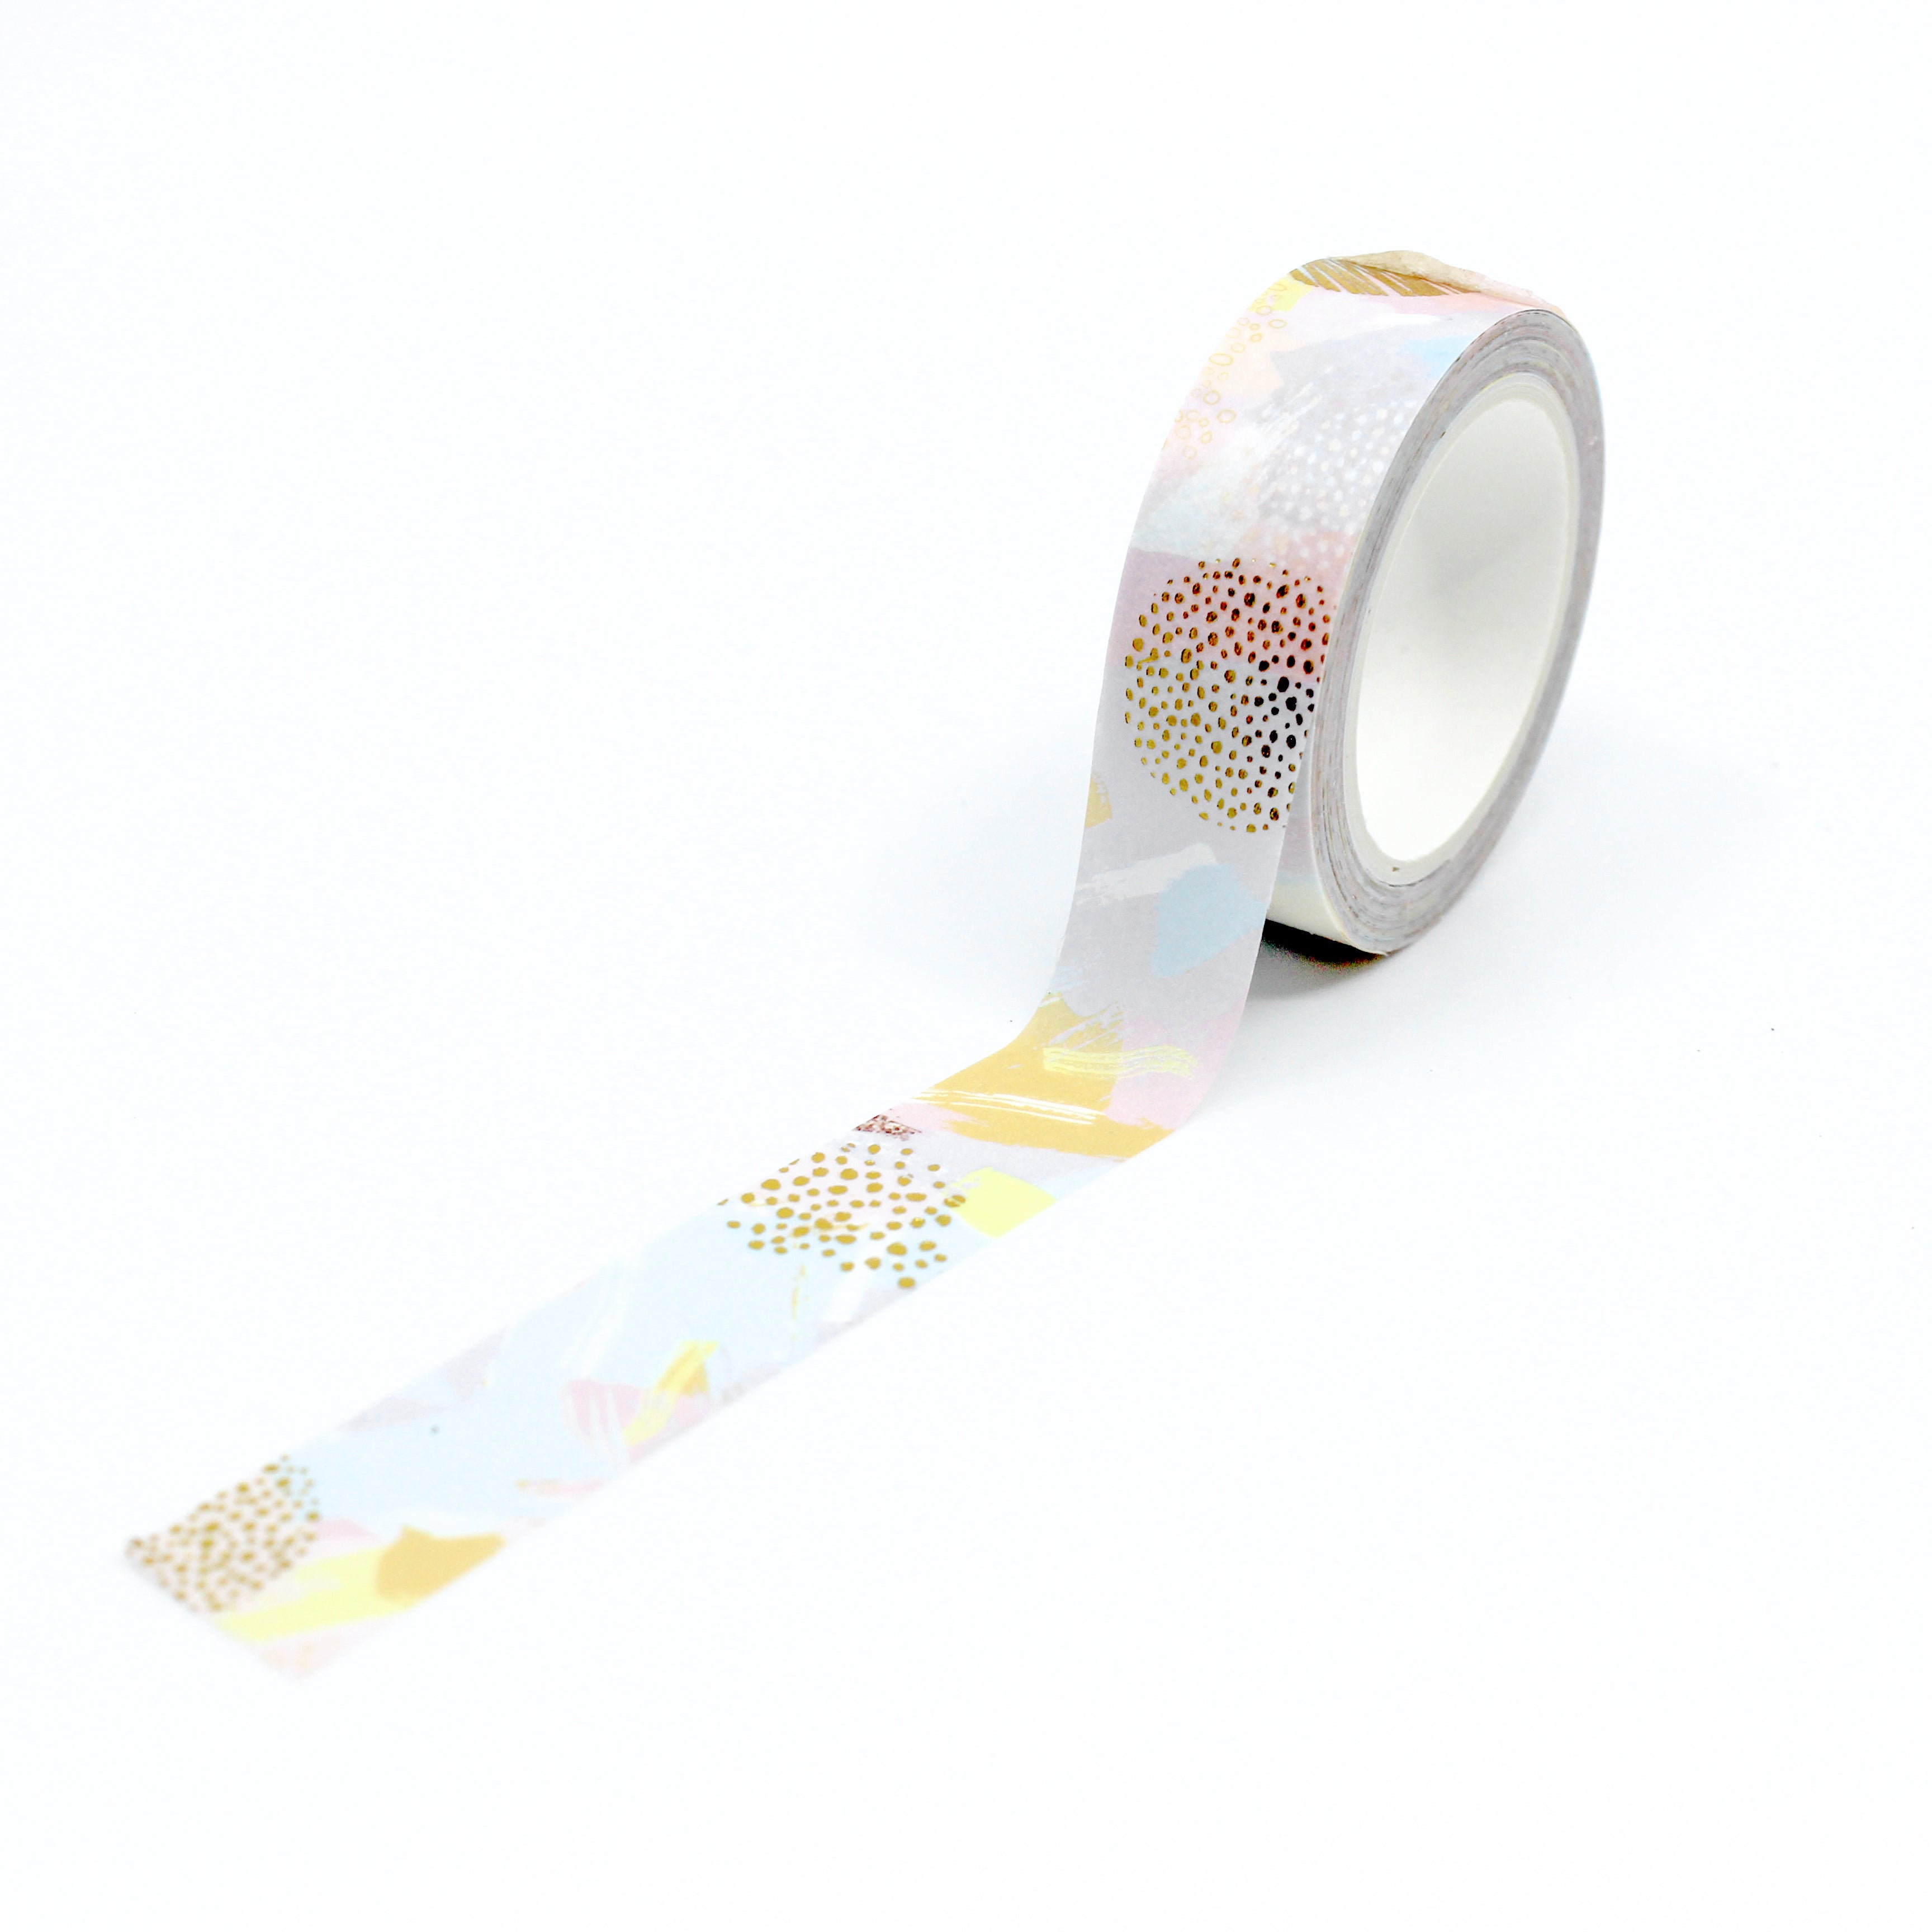 This tape is a unique and pretty decorative pattern that is reminiscent of a retro 80's pattern and will add some sparkle to any craft project, BUJO, or planner spread. We offer four different patterns in this style in our shop. This tape is sold at BBB Supplies Craft Shop.